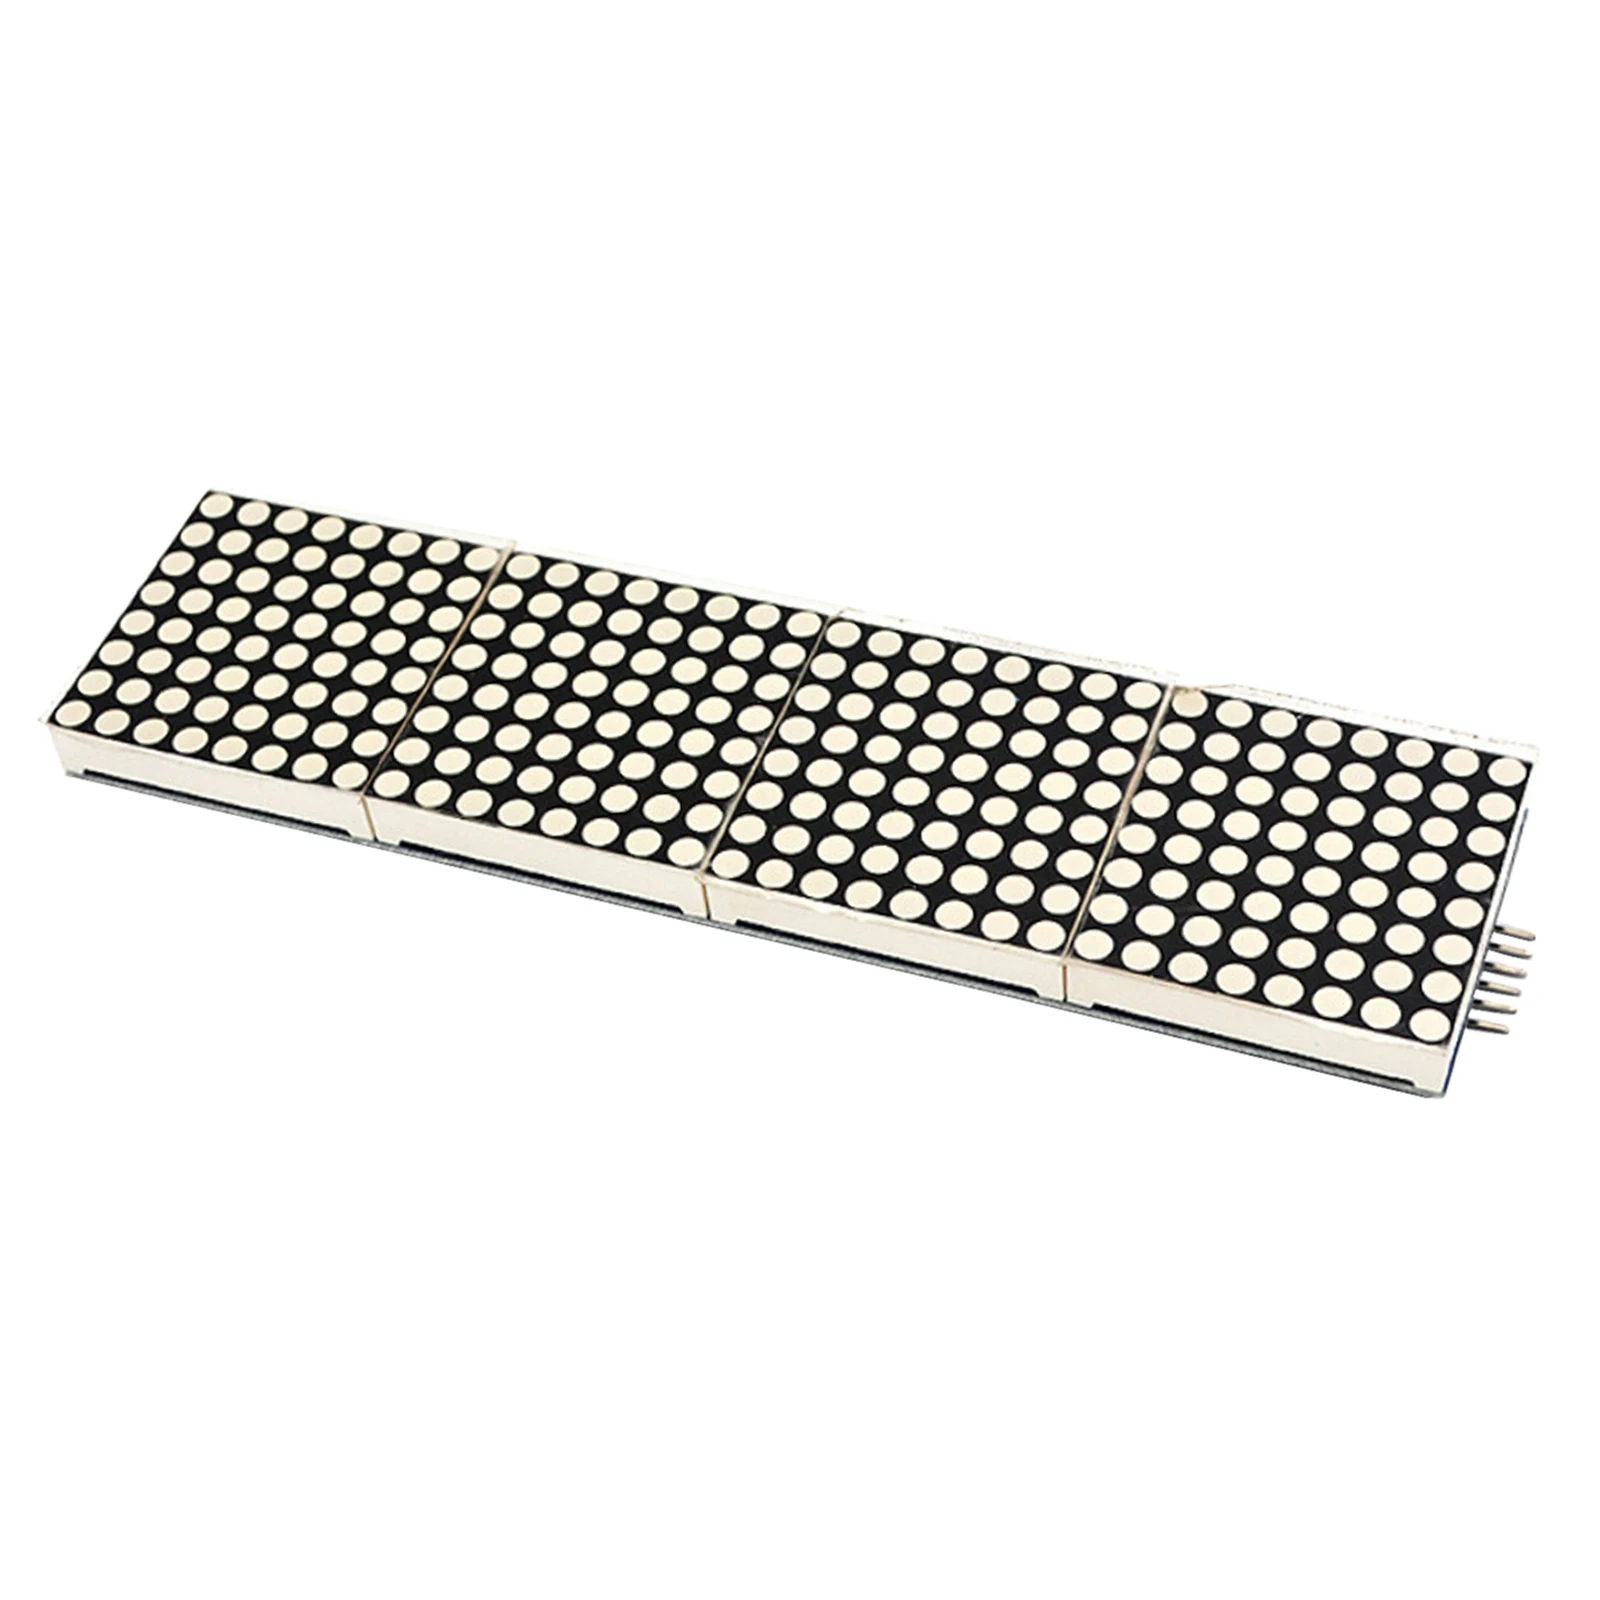 HT1632C LED Dot Matrices 8x32 - Triple Color  common Anode Display